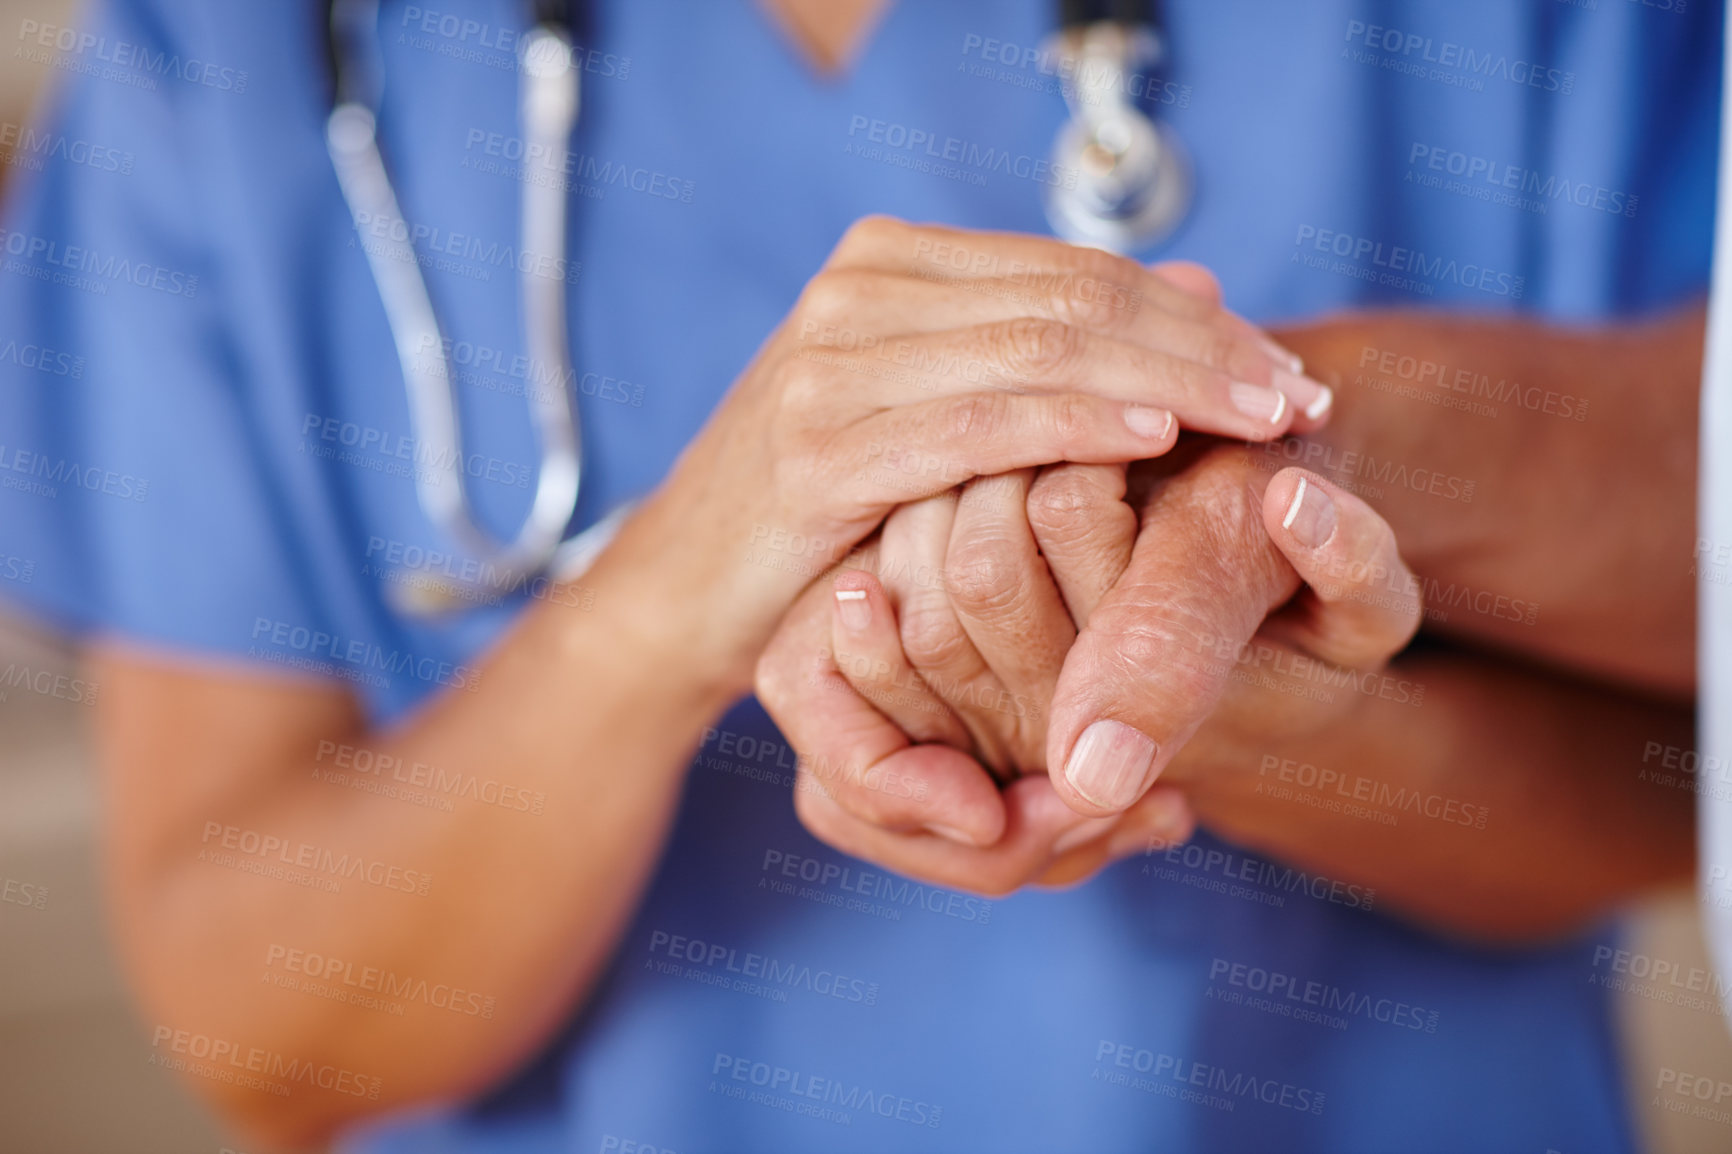 Buy stock photo Cropped shot of a healthcare worker holding a senior patient's hands